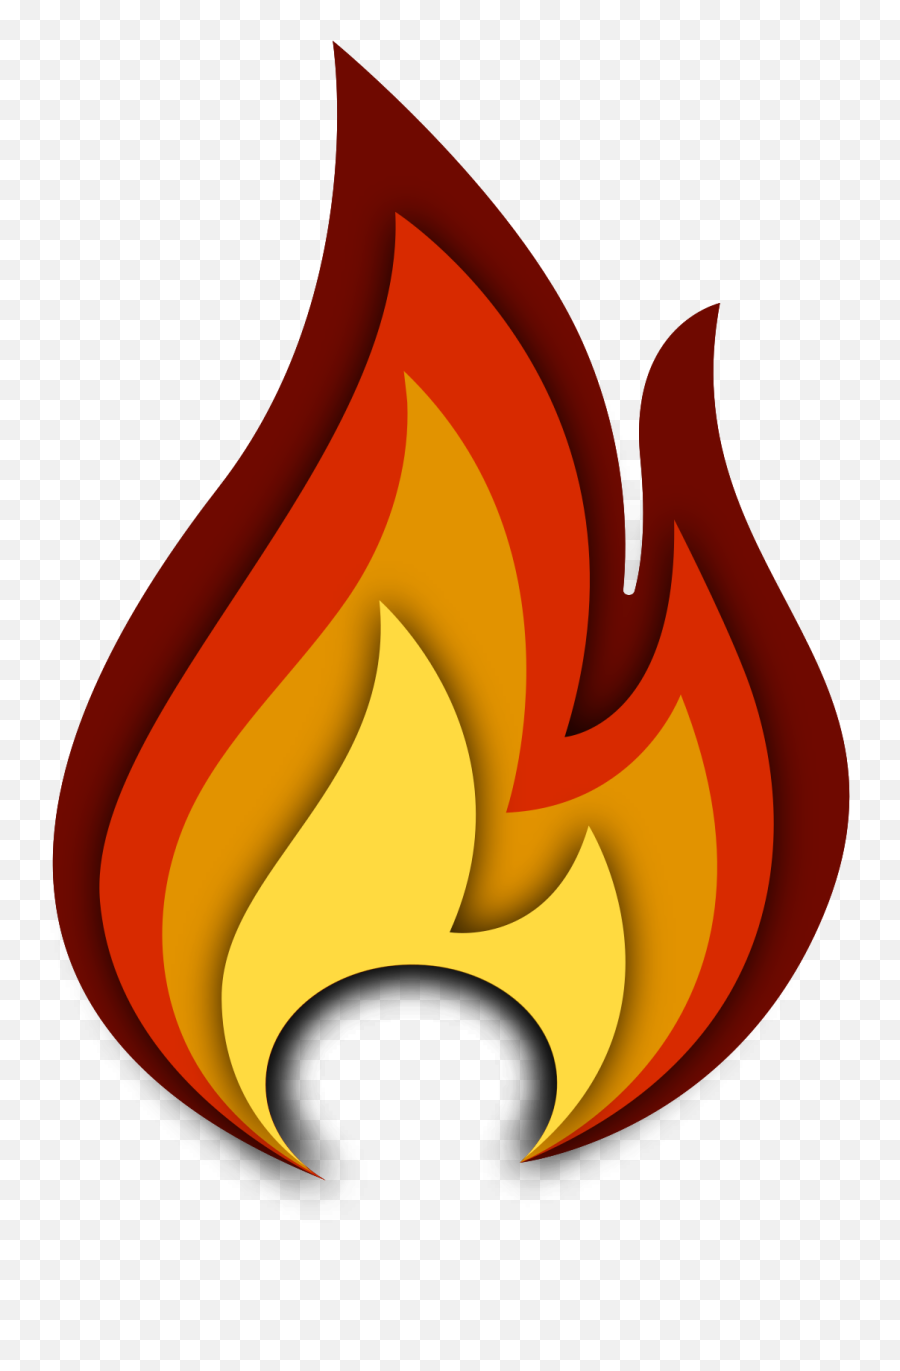 Free Fire Png With Transparent Background - Fre Fire Png Fuego,Fire Png